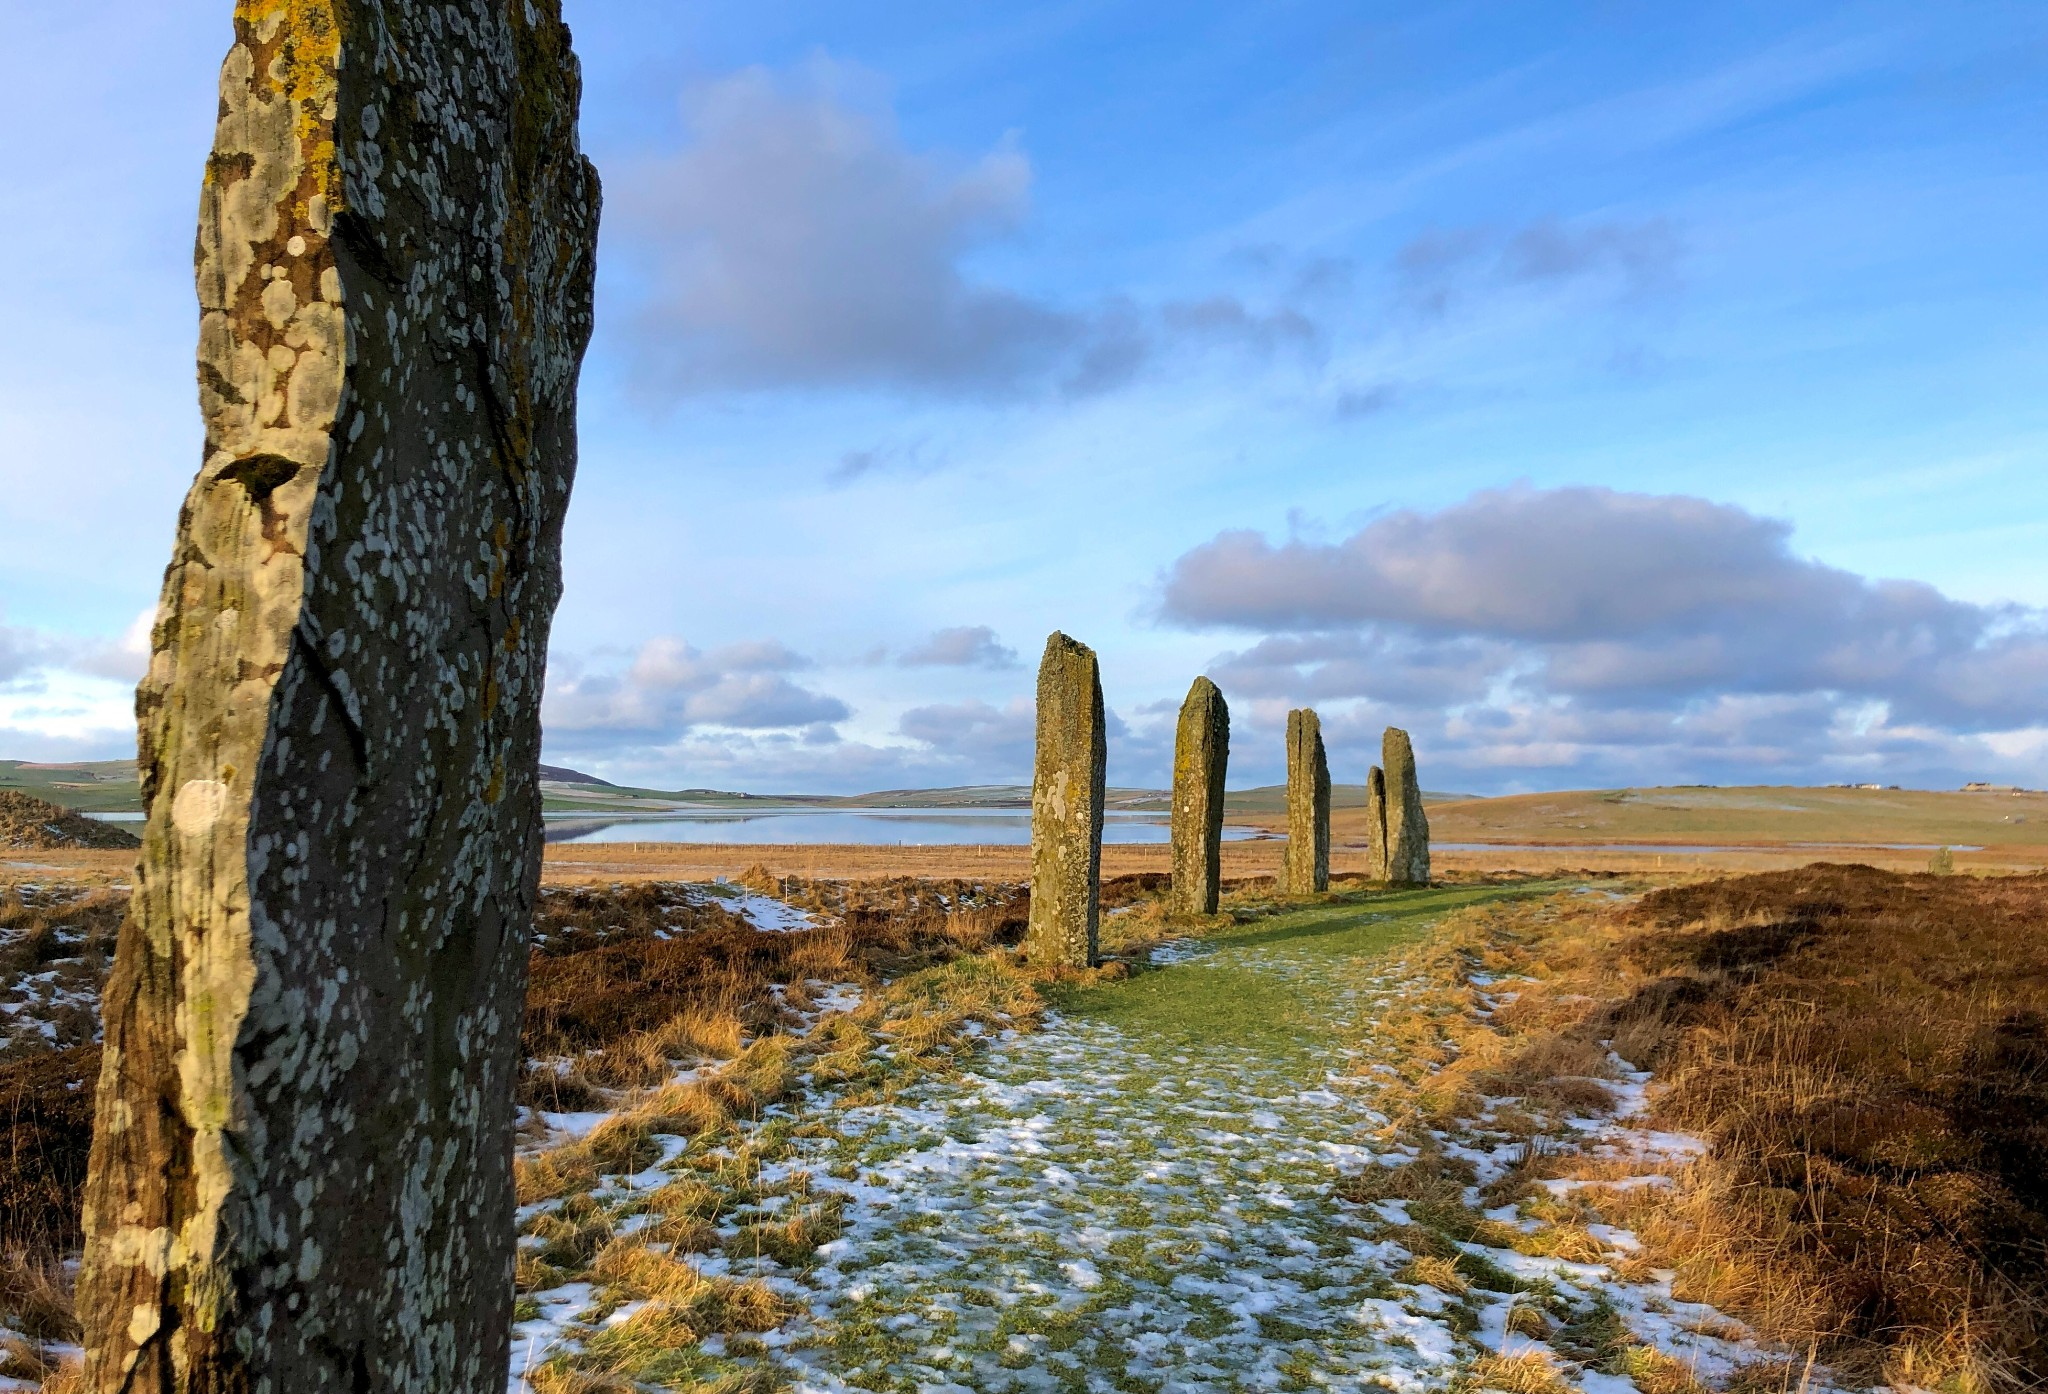 Ring of Brodgar, Orkney - image by Mandy Sykes